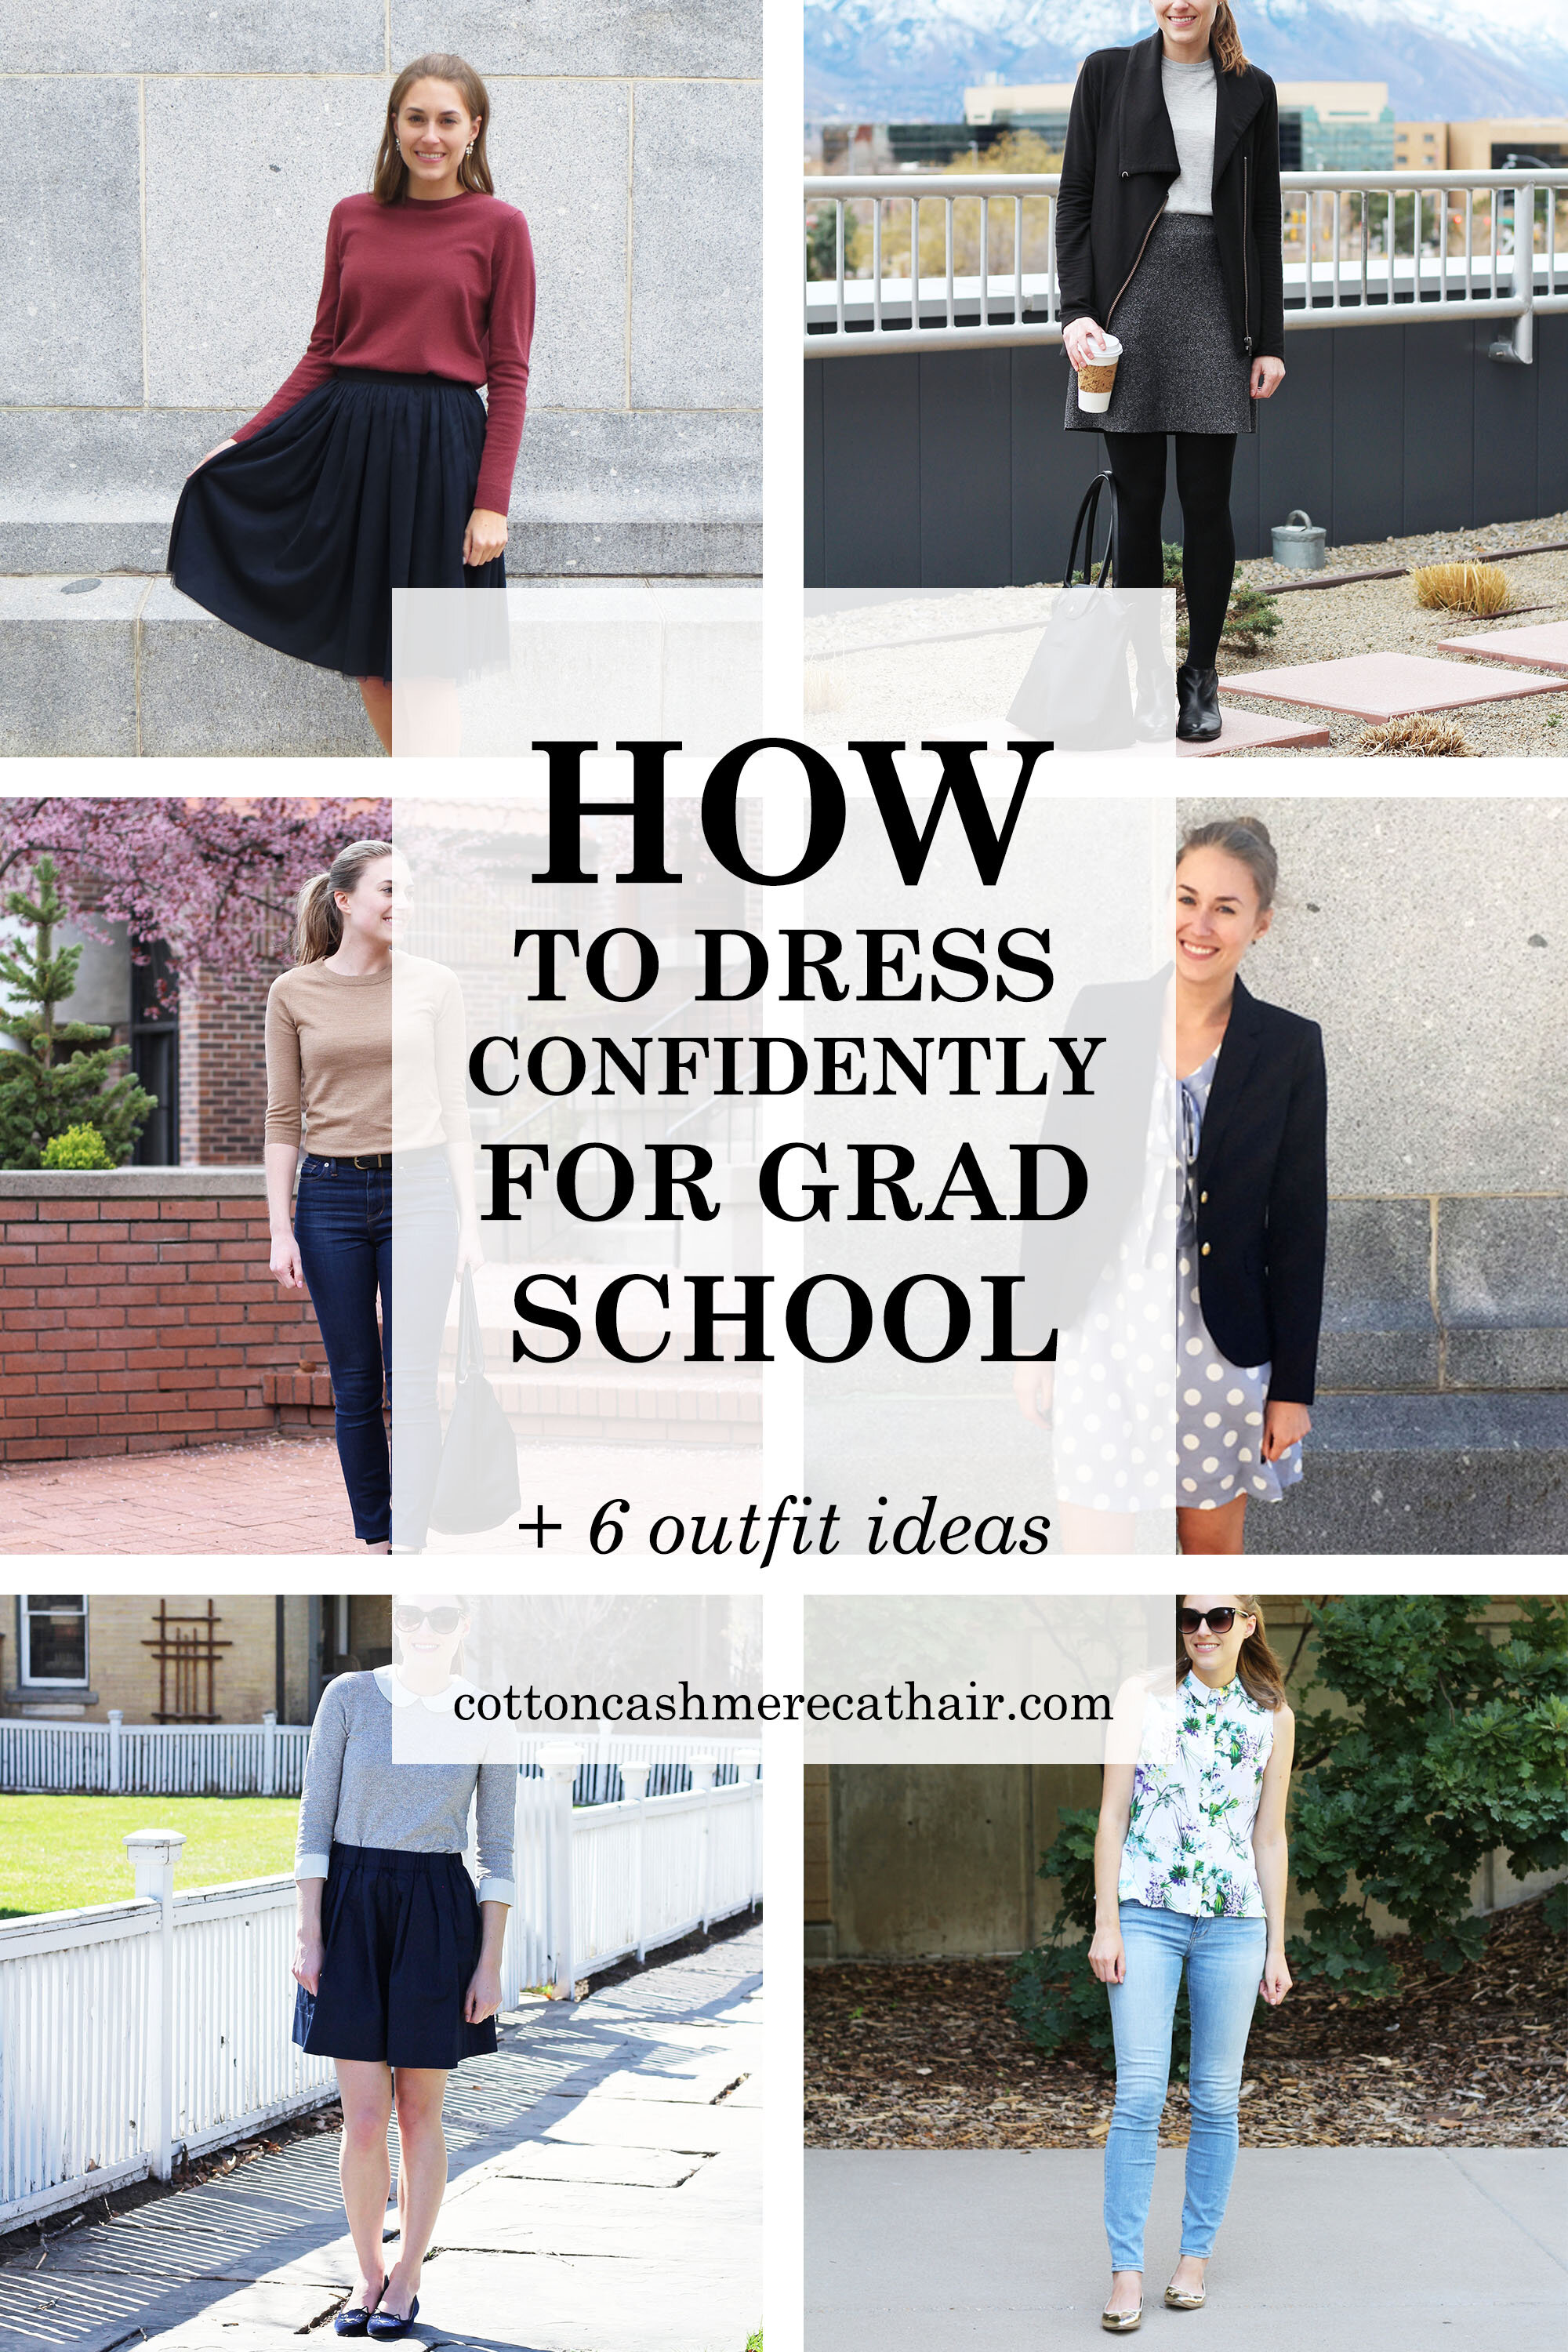 How to dress confidently for grad school: 6 outfit ideas